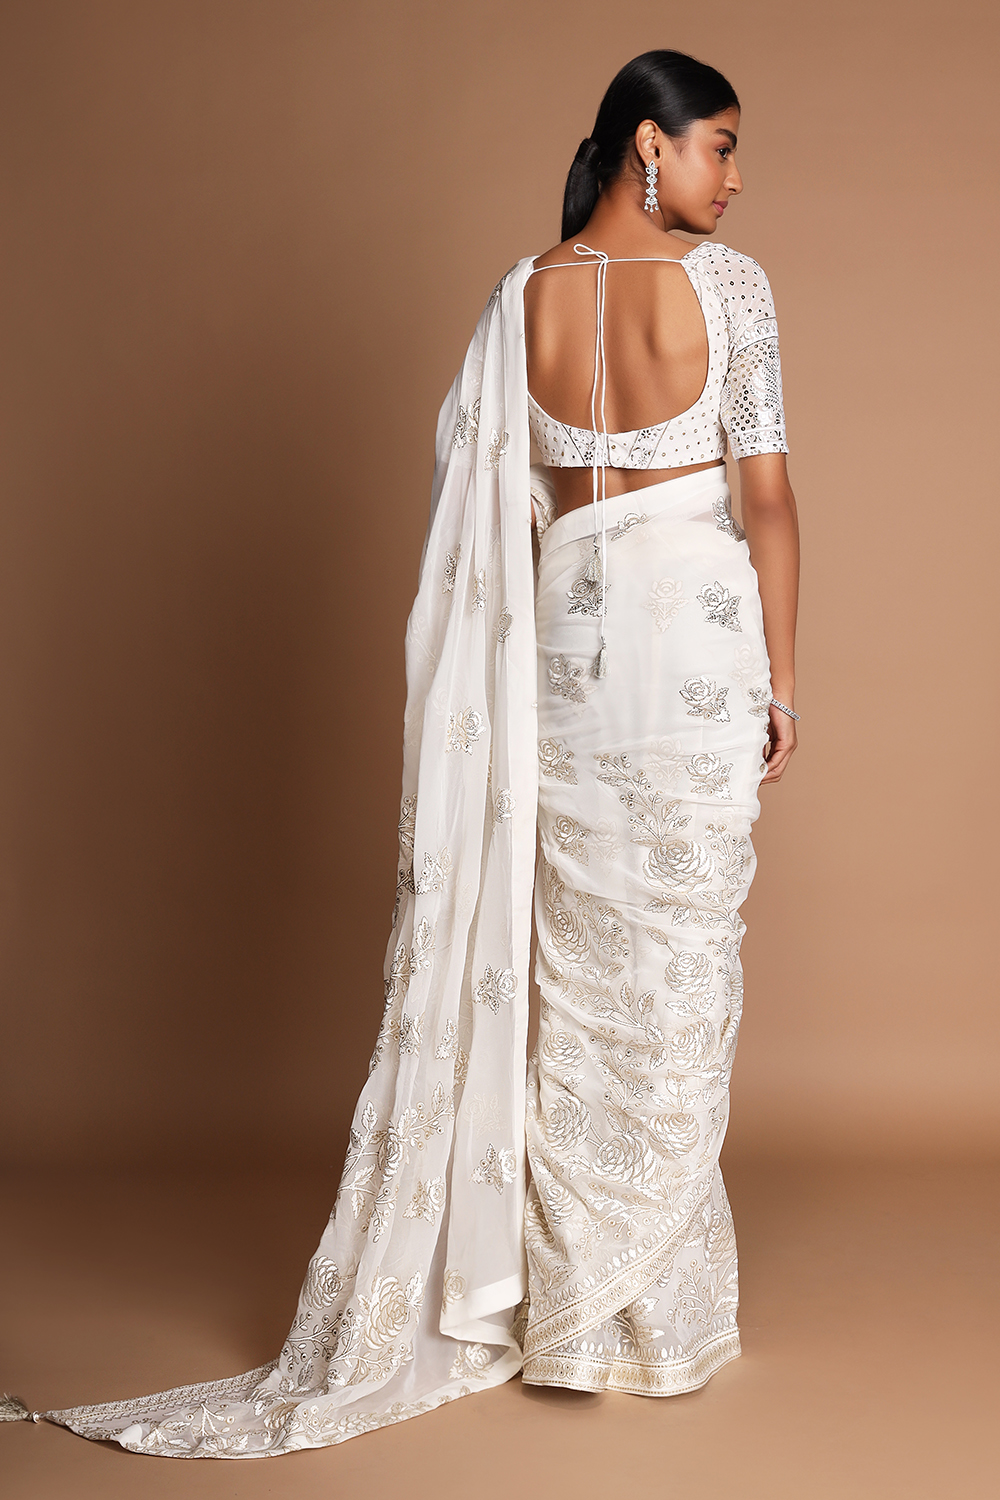 White Saree | Party wear sarees, Saree wearing styles, Fancy blouse designs-sgquangbinhtourist.com.vn